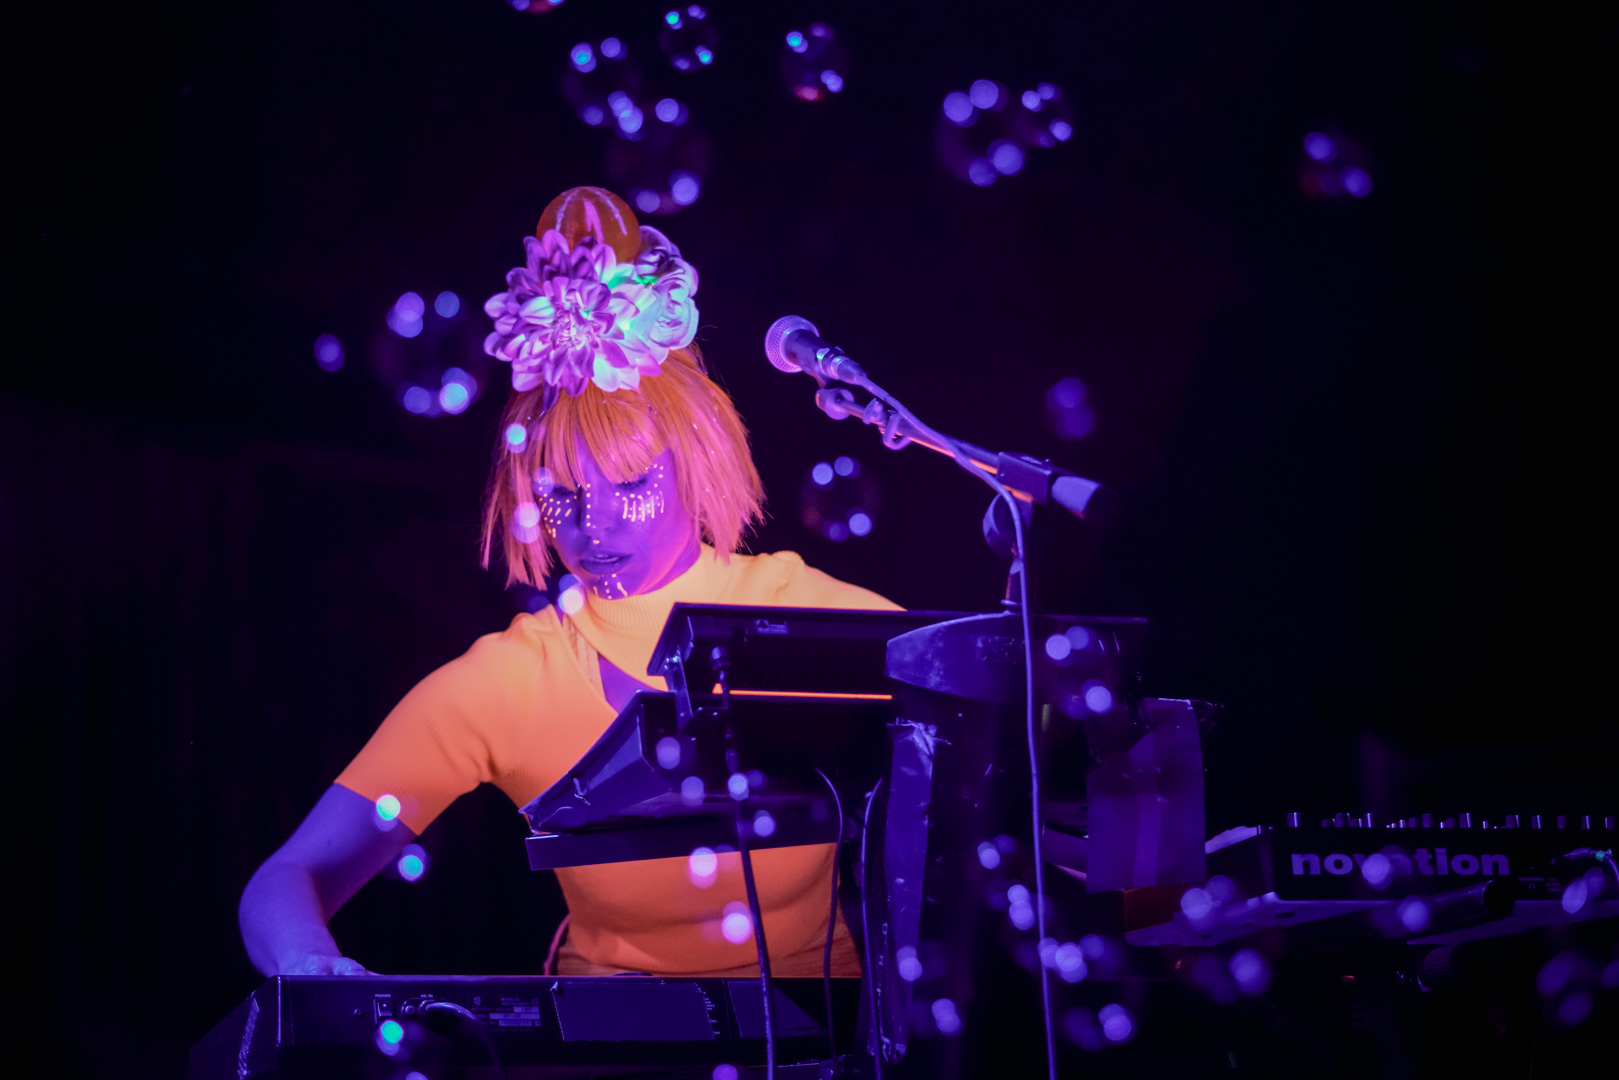 A woman in neon orange outfit plays keys 